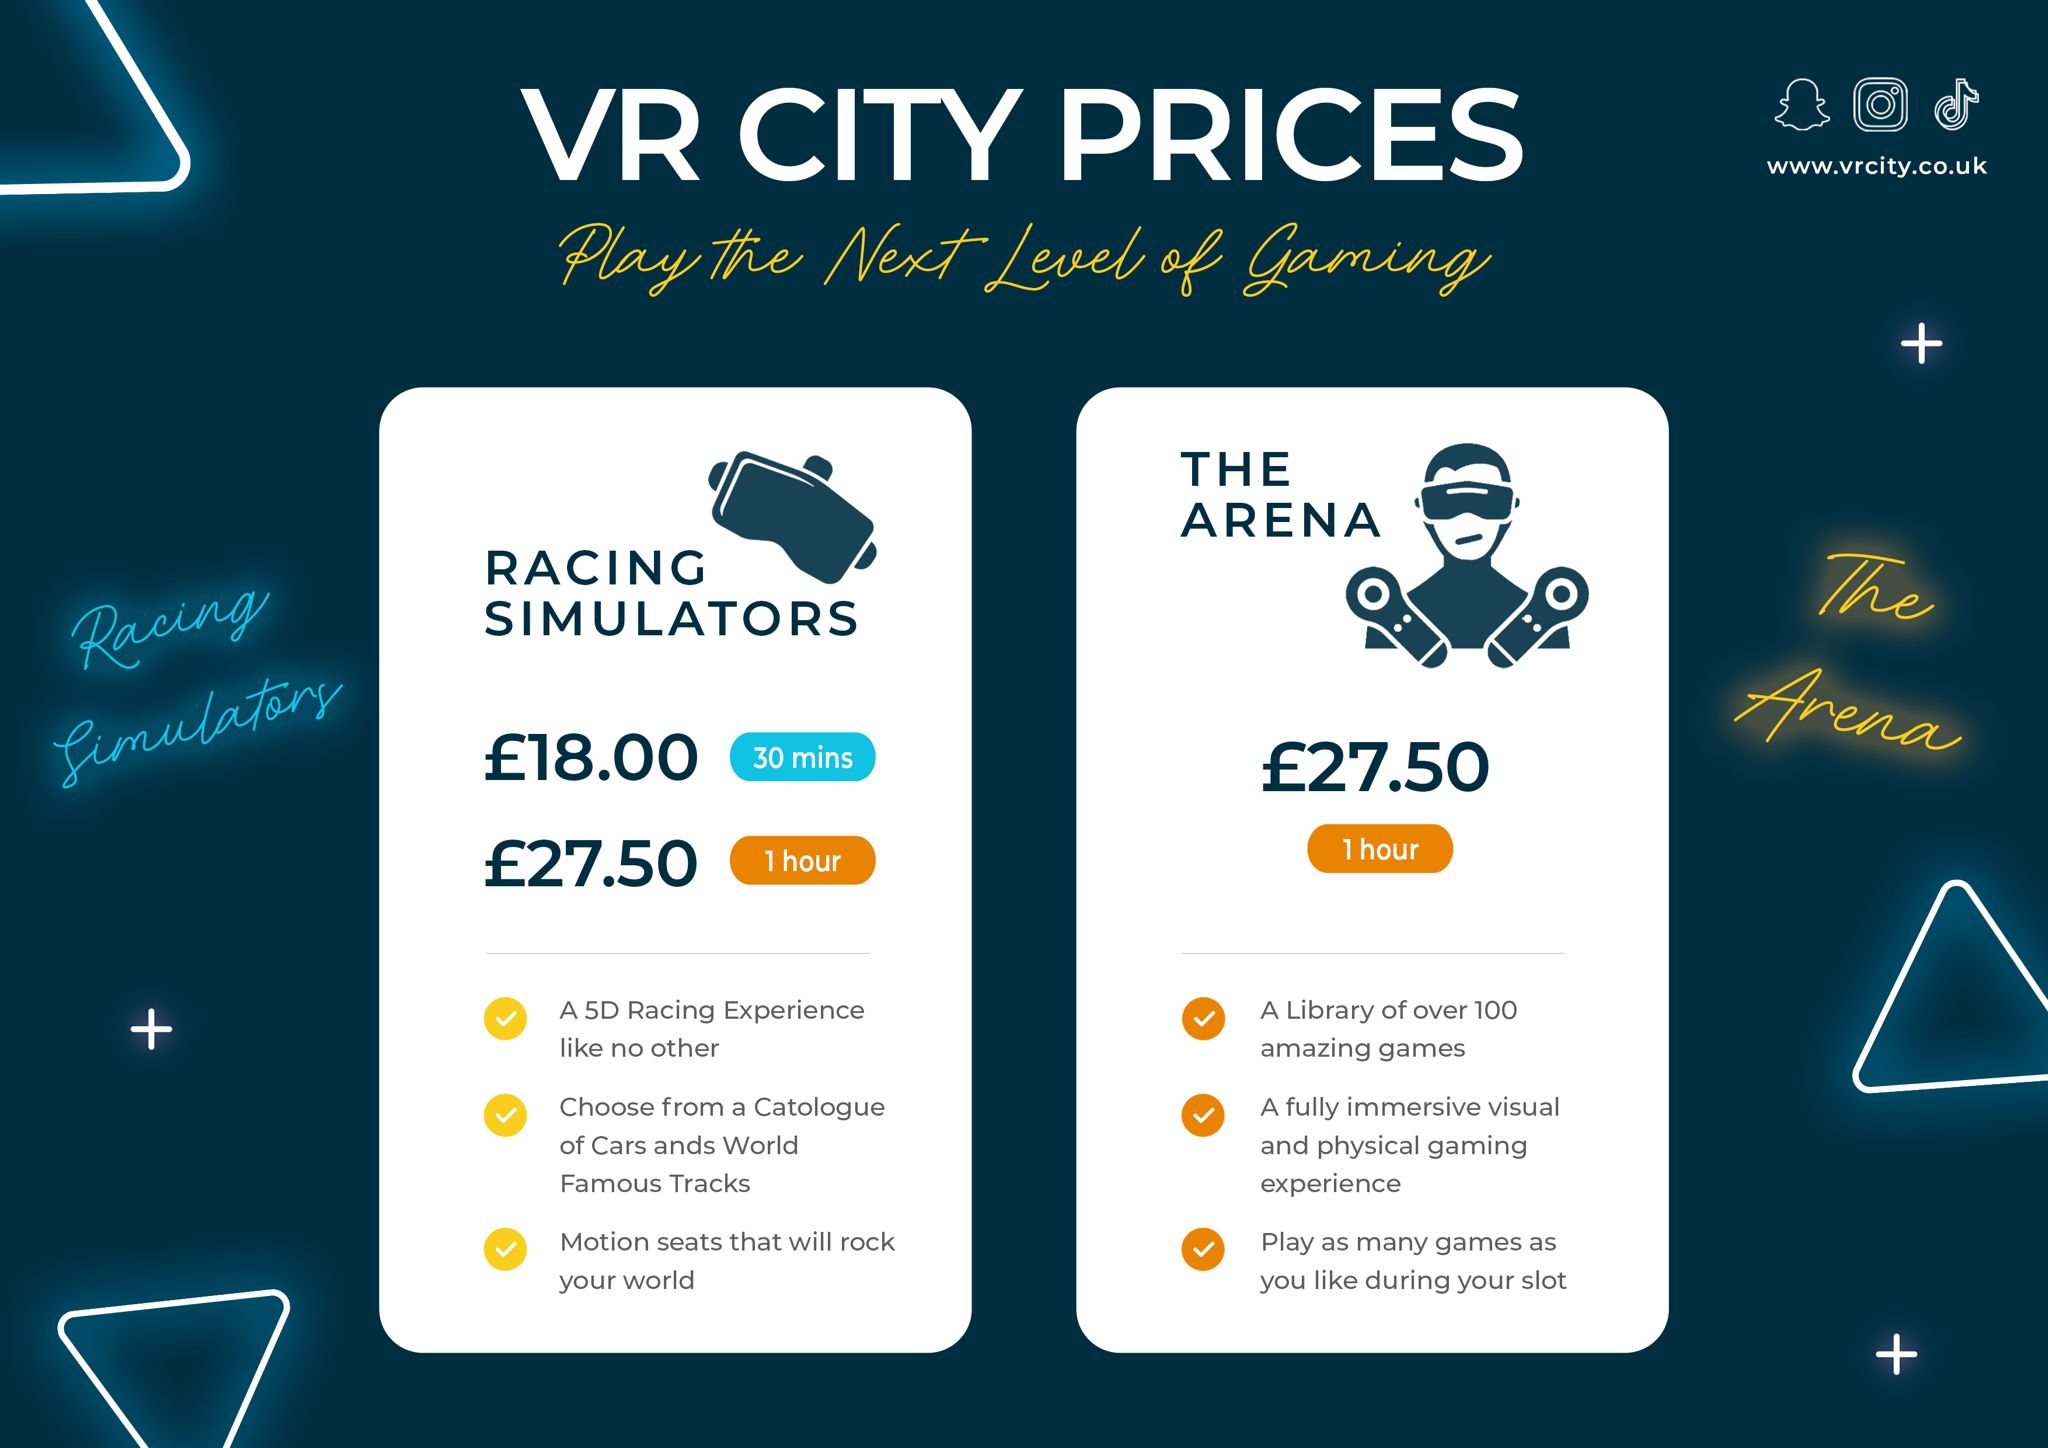 vr city prices VR City Bradford virtual reality venue parties and virtual simulation, Birthday ideas, Things to do in groups in bradford, Activities to do for Eid, Gaming for boys,Things to do near me, VR experience, things to do in bradford for fun.